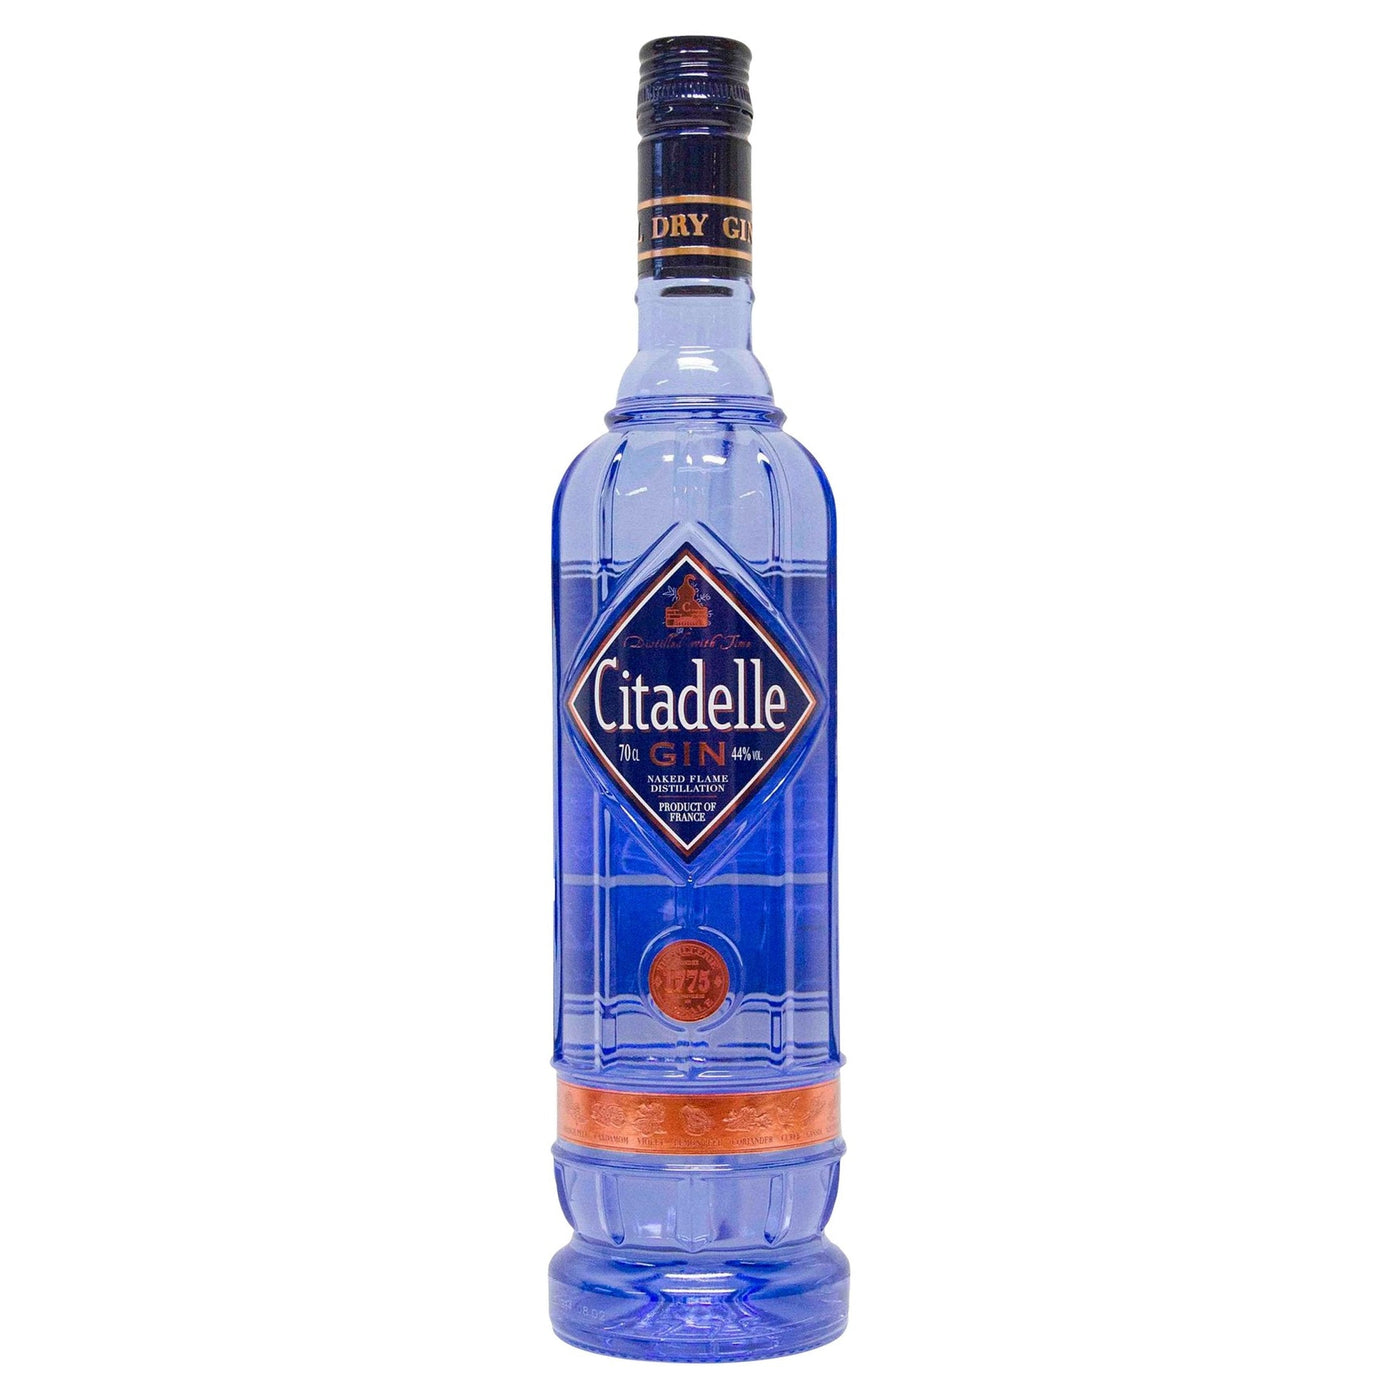 Citadelle Gin 44% Size: 70cl